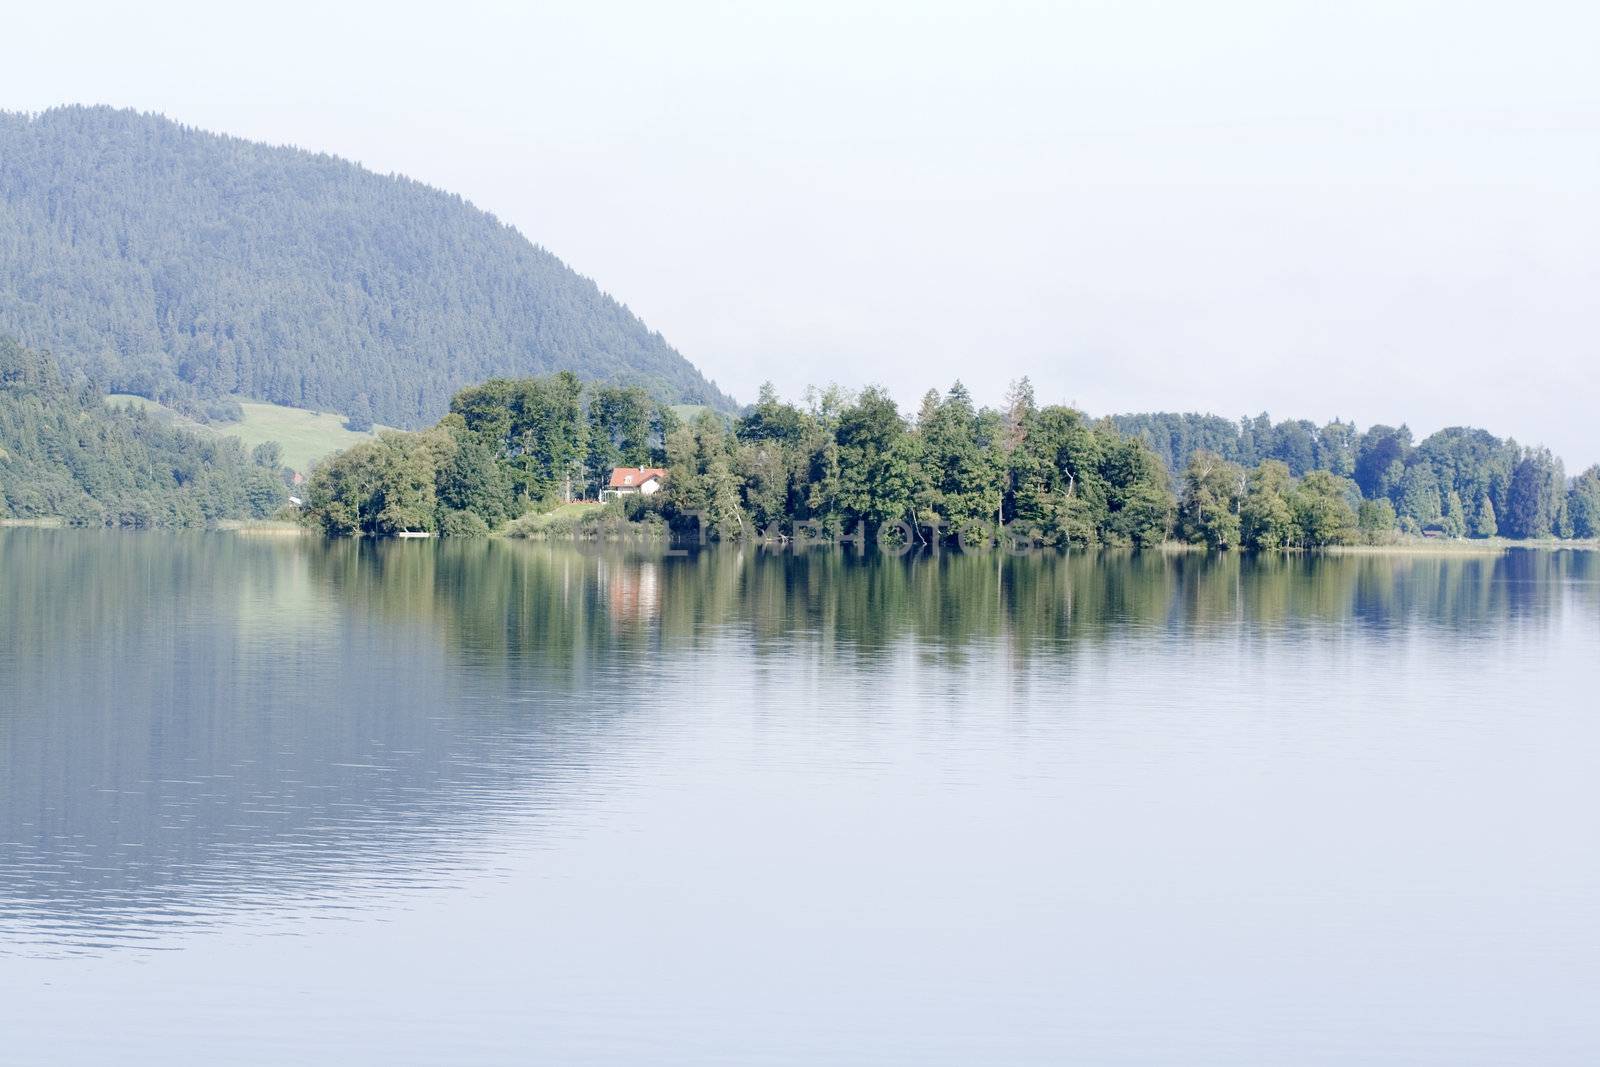 Panoramic image of the island of Wörth in Schliersee